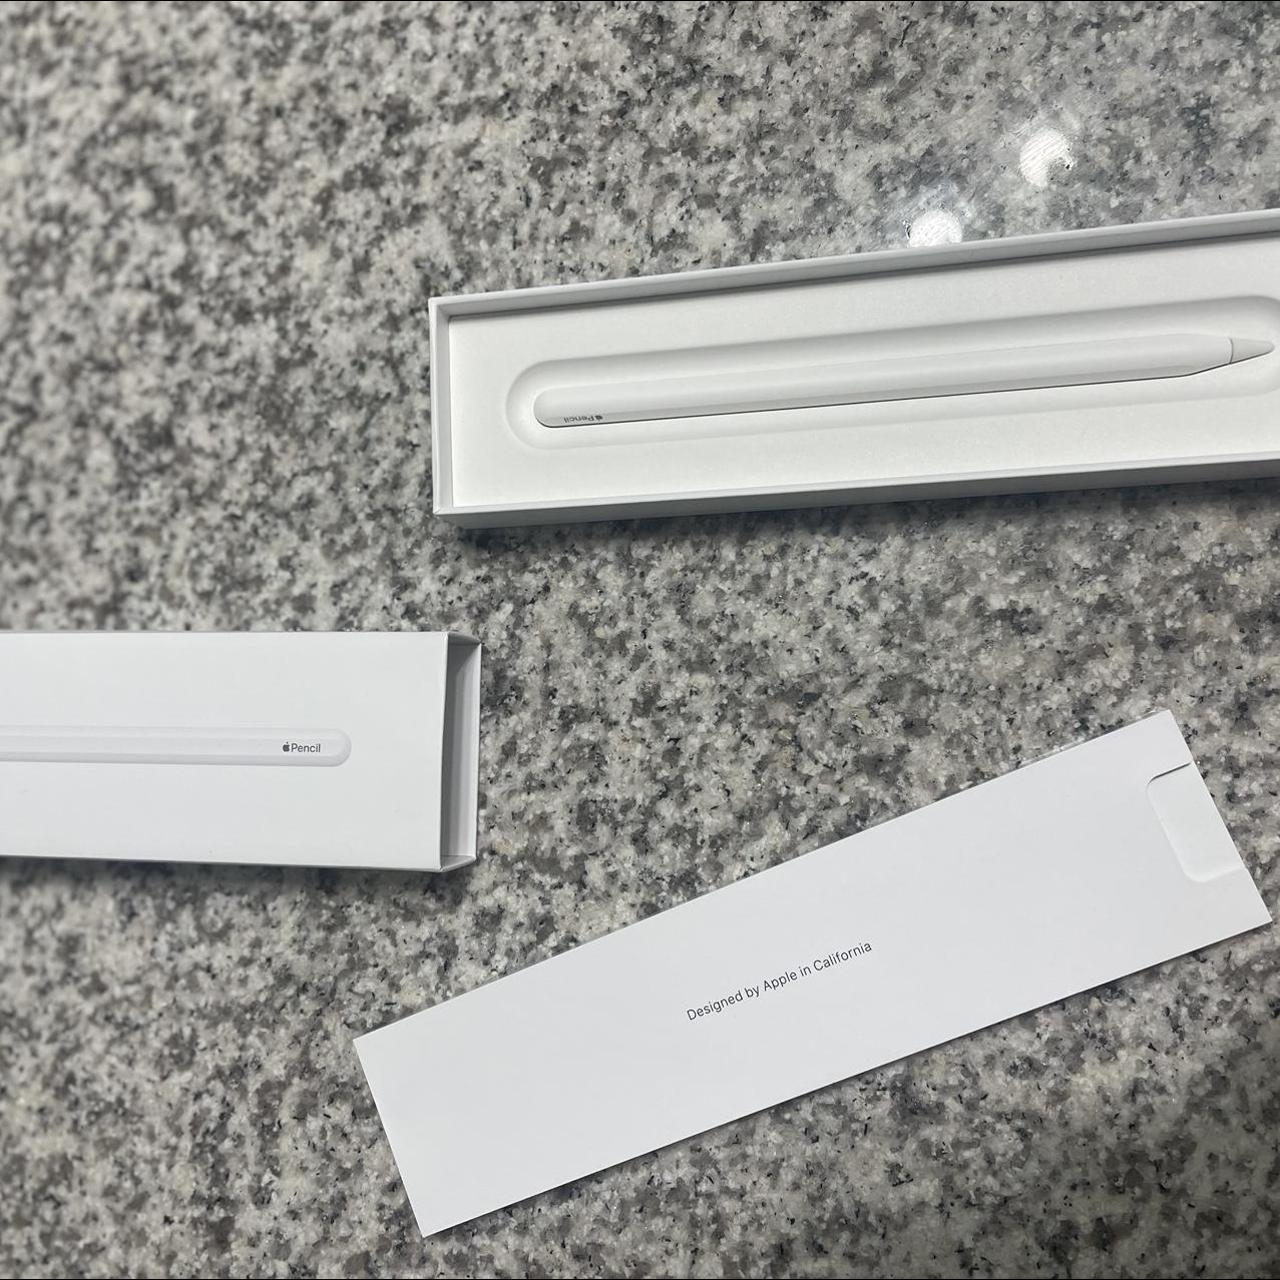 Product Image 3 - Apple Pencil 2nd gen 
Shipping